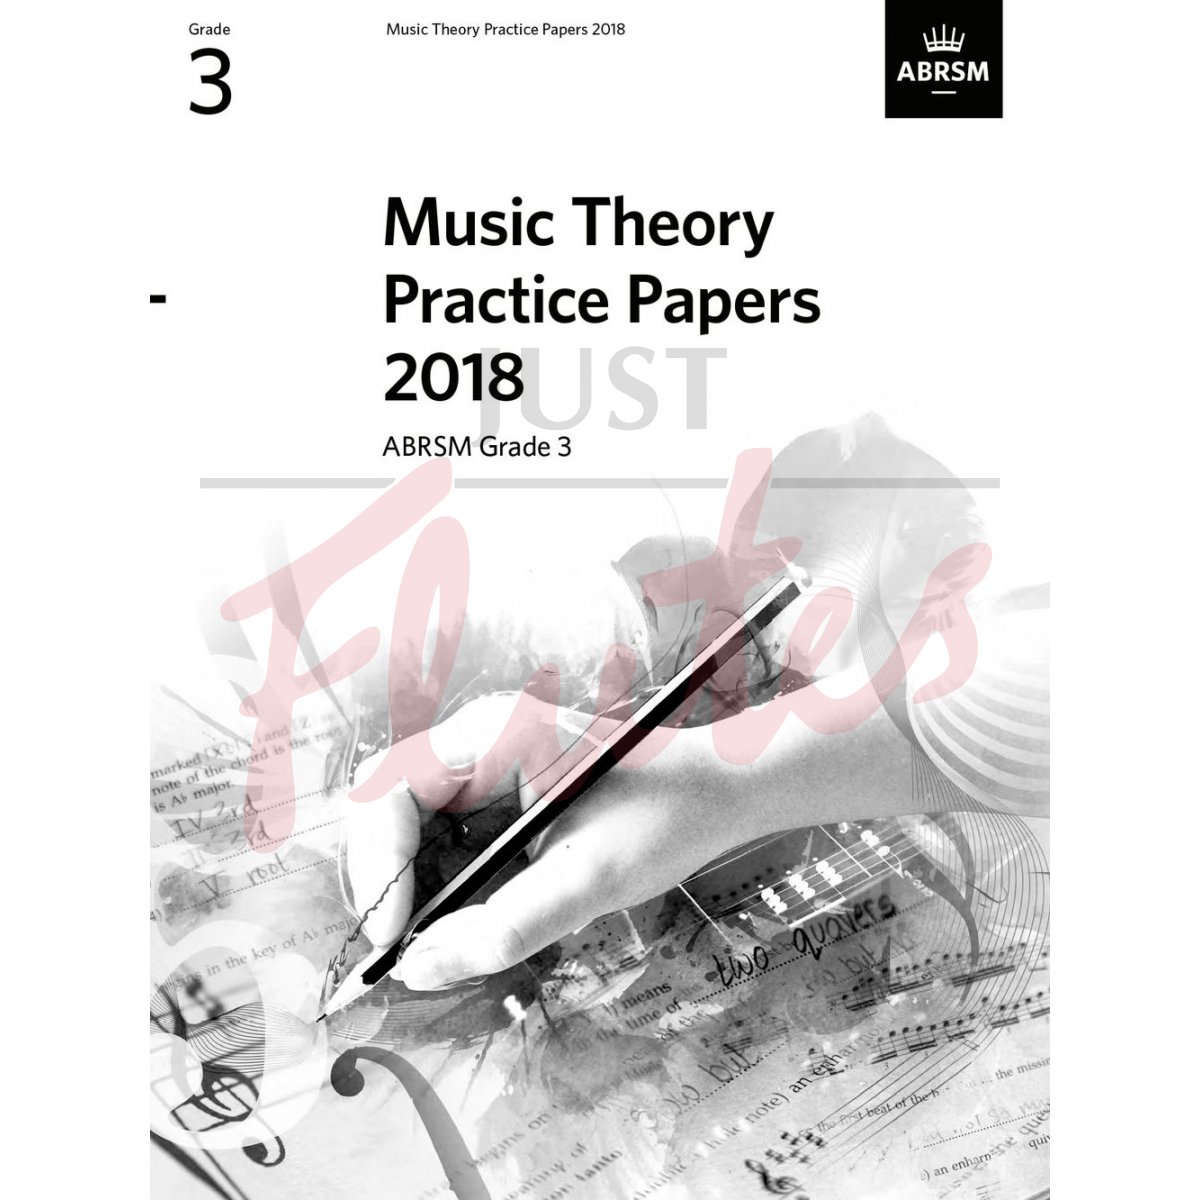 Music Theory Practice Papers 2018 Grade 3